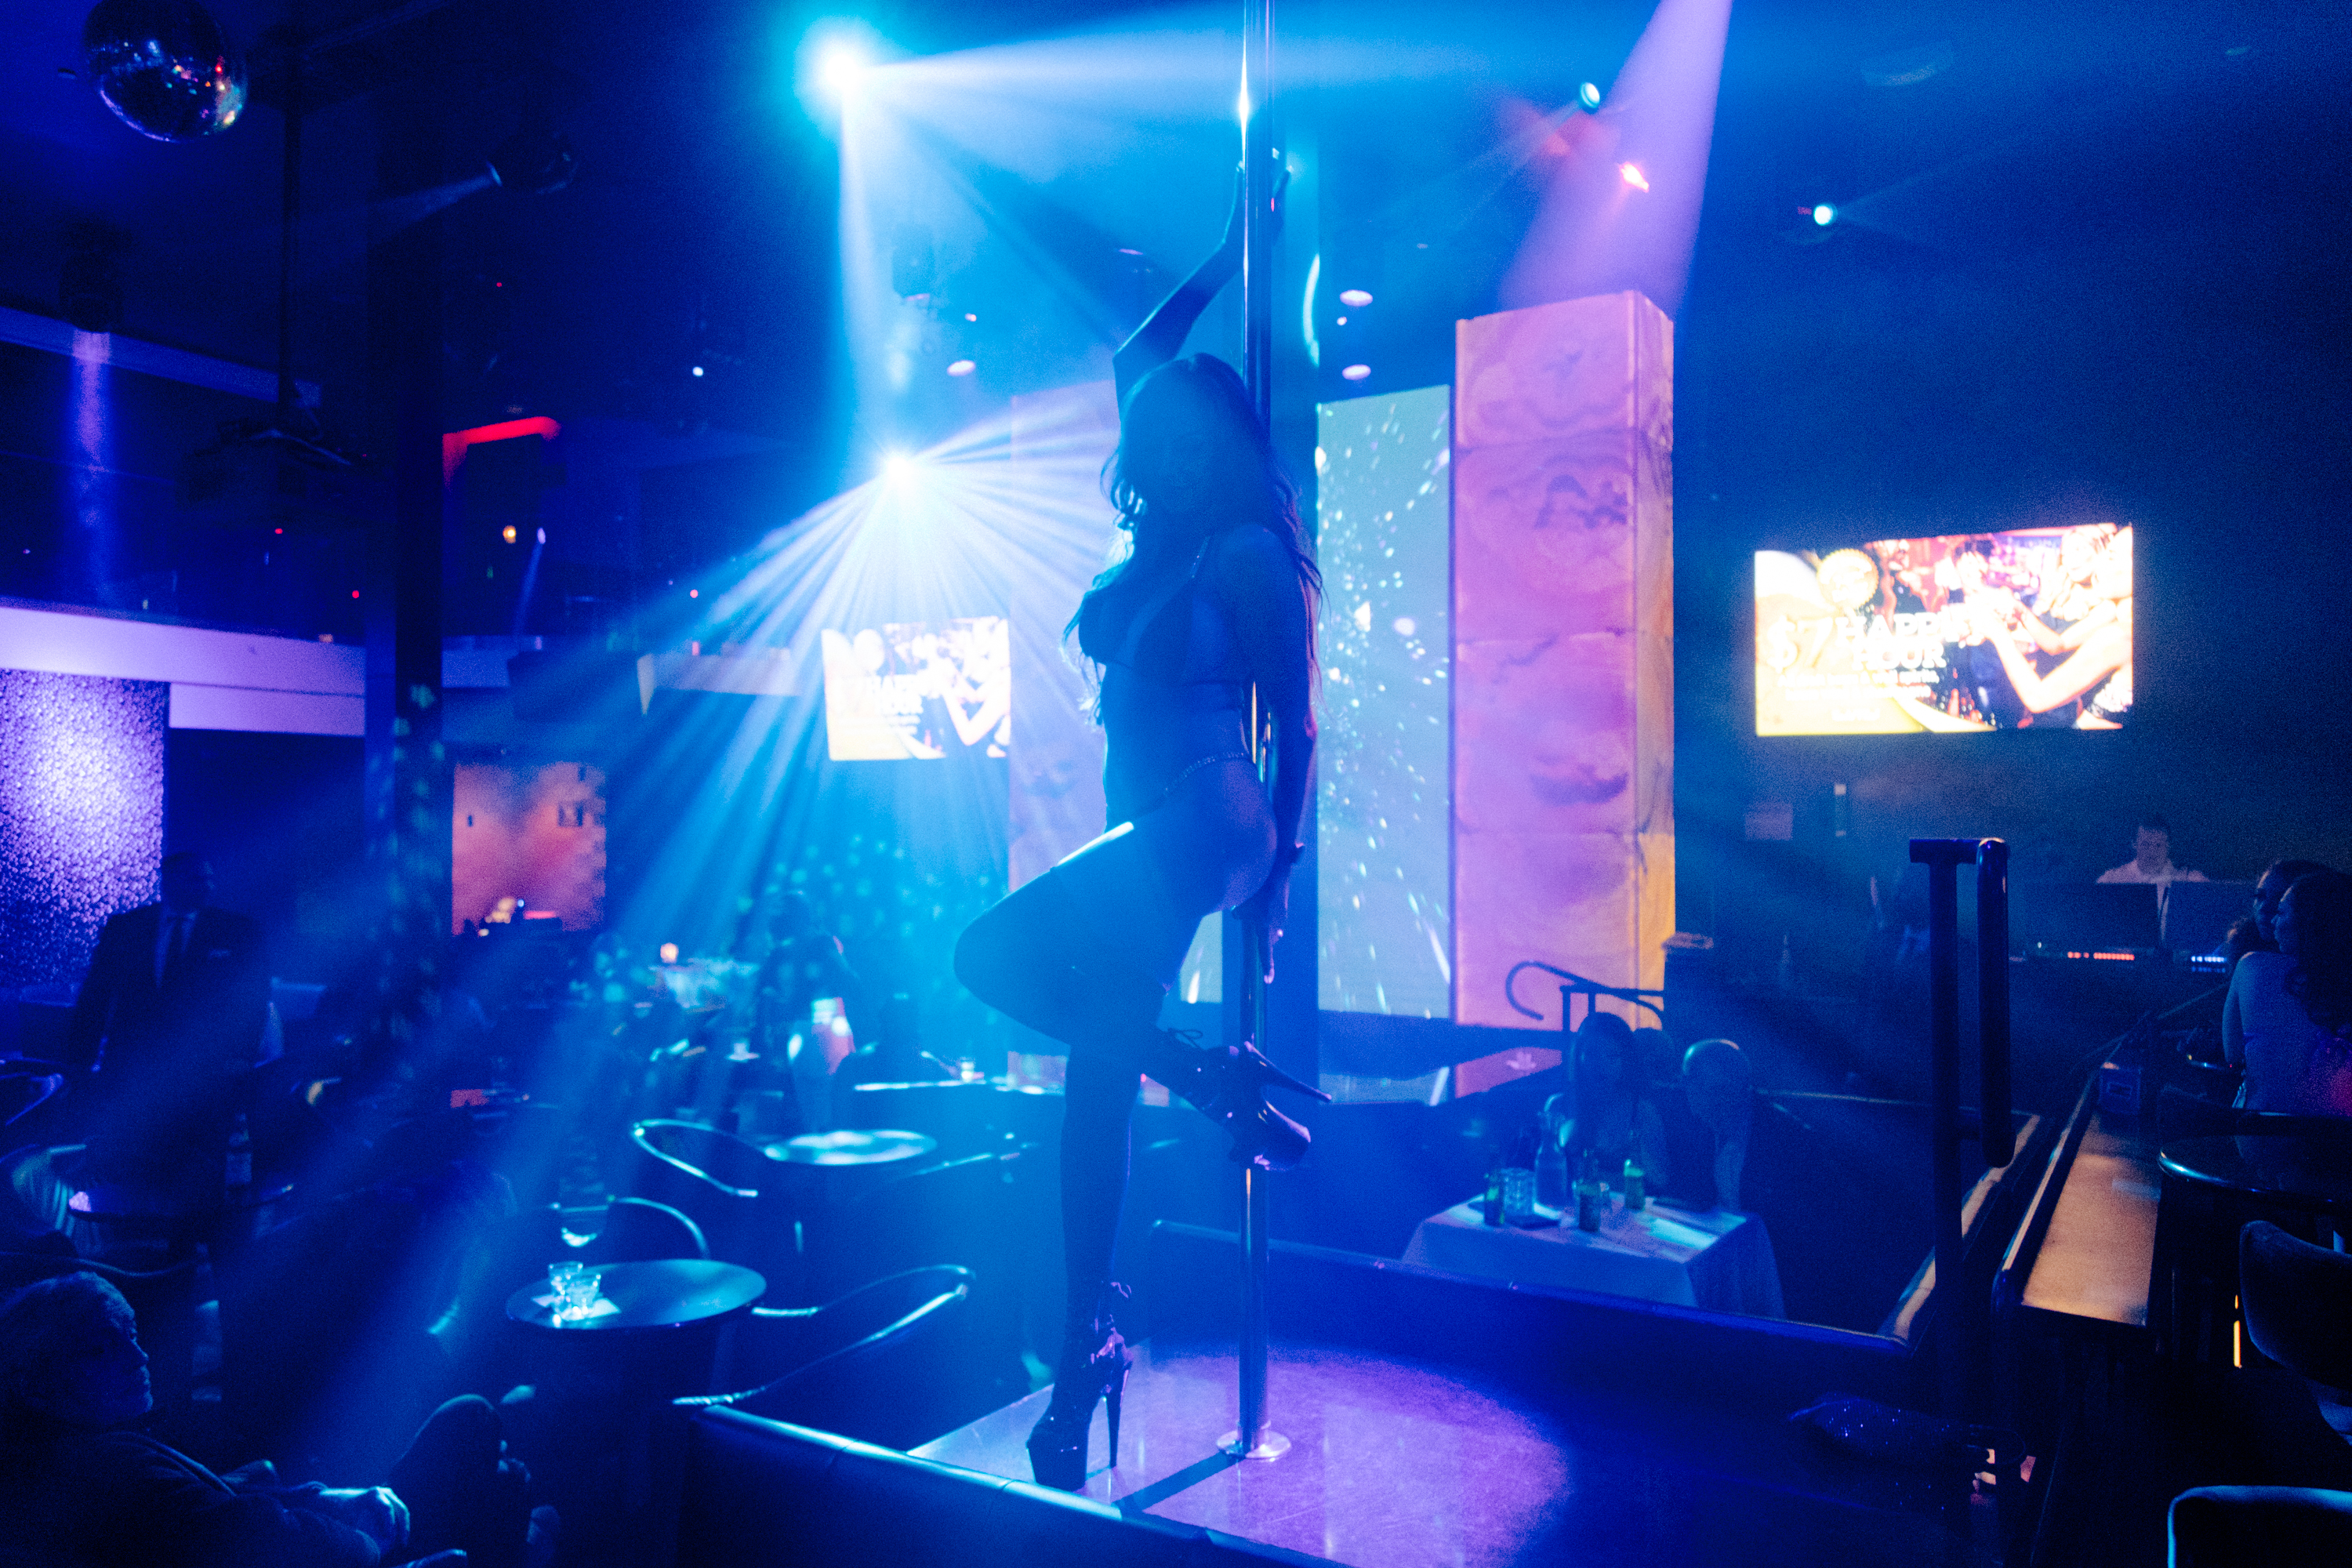 An exotic dancers leans on a pole and is silhouetted in the middle a club with spot lights in the background.